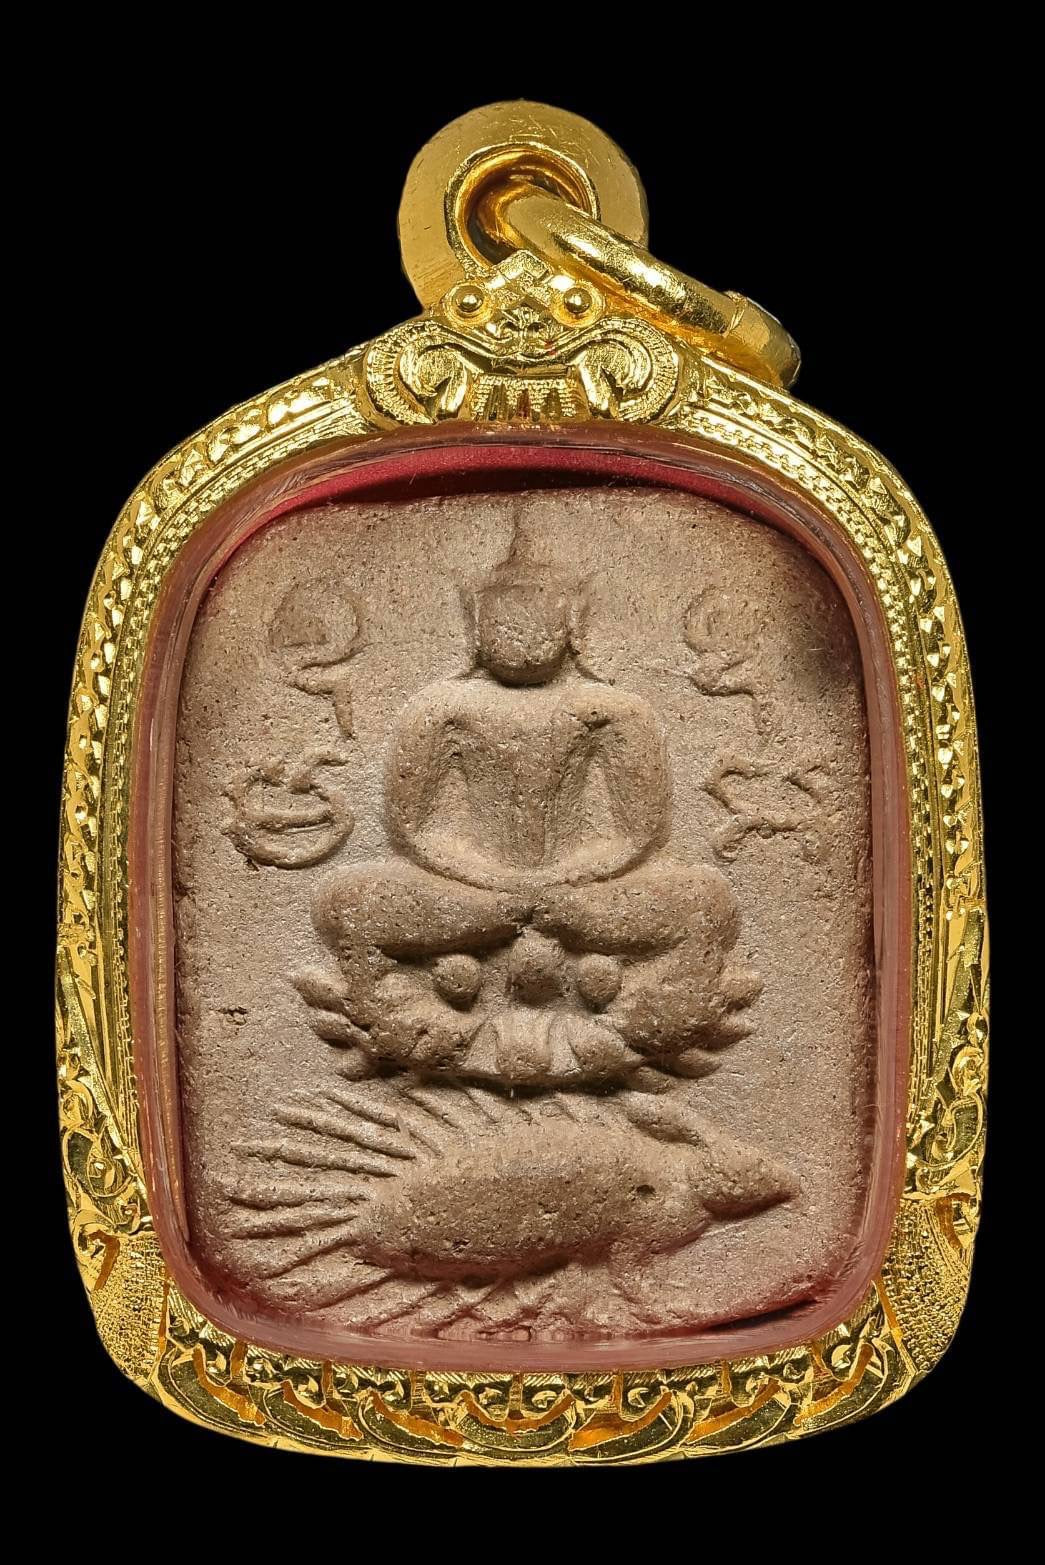 Somdej With Porcupine , The Wealth Amulet in Life . Luang Phor Parn Wat Bang Nong Pho